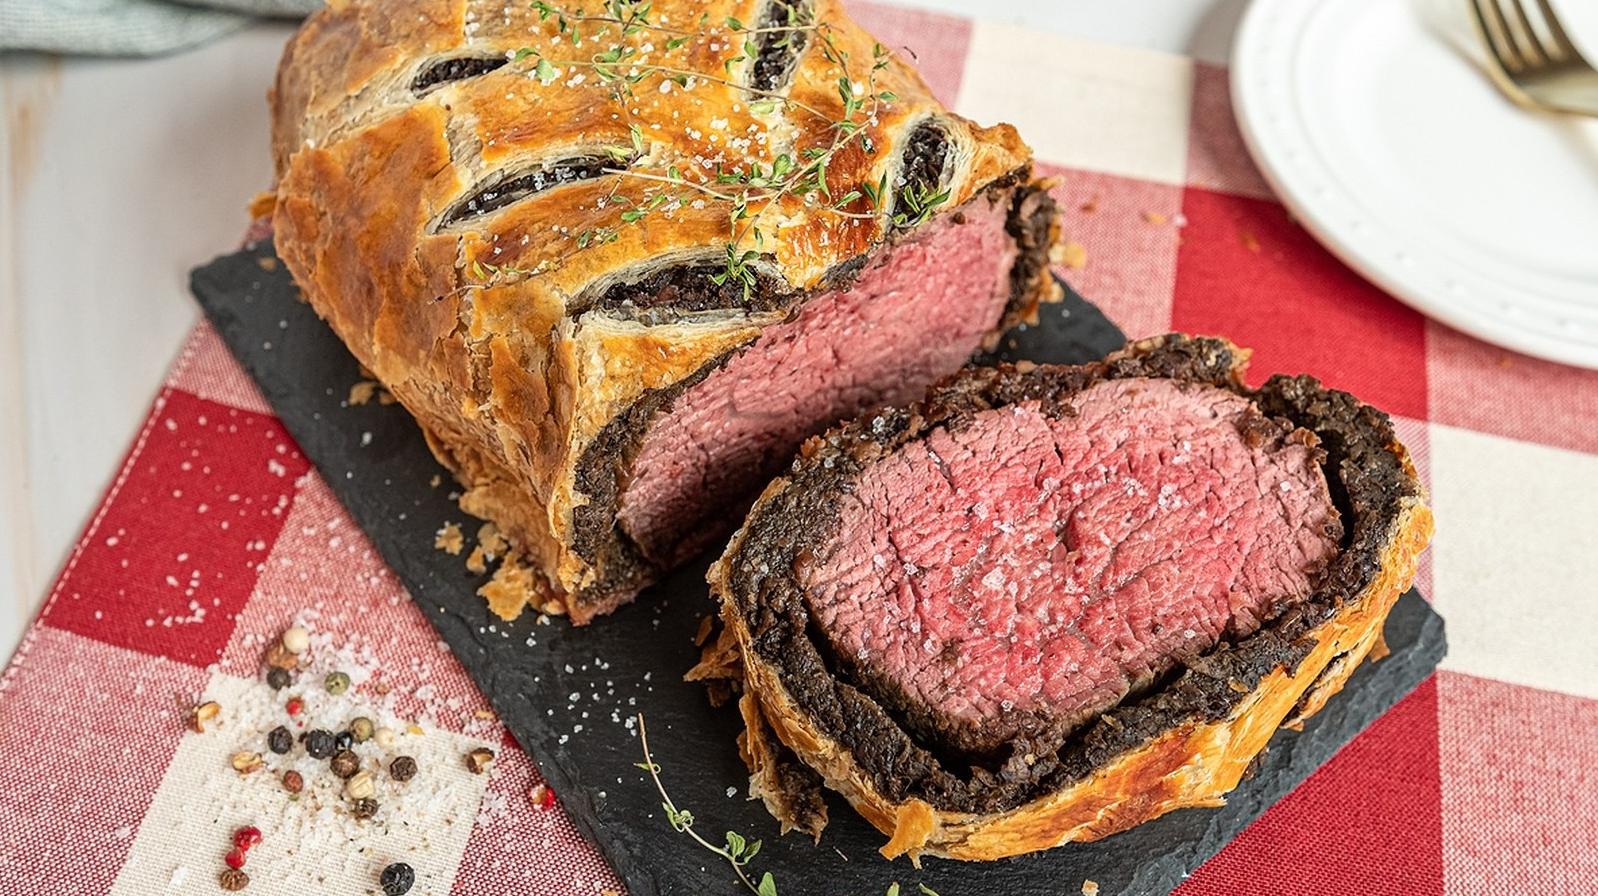  A mouthwatering cross-section of our It Tastes Like Beef Wellington, revealing all its delectable layers.